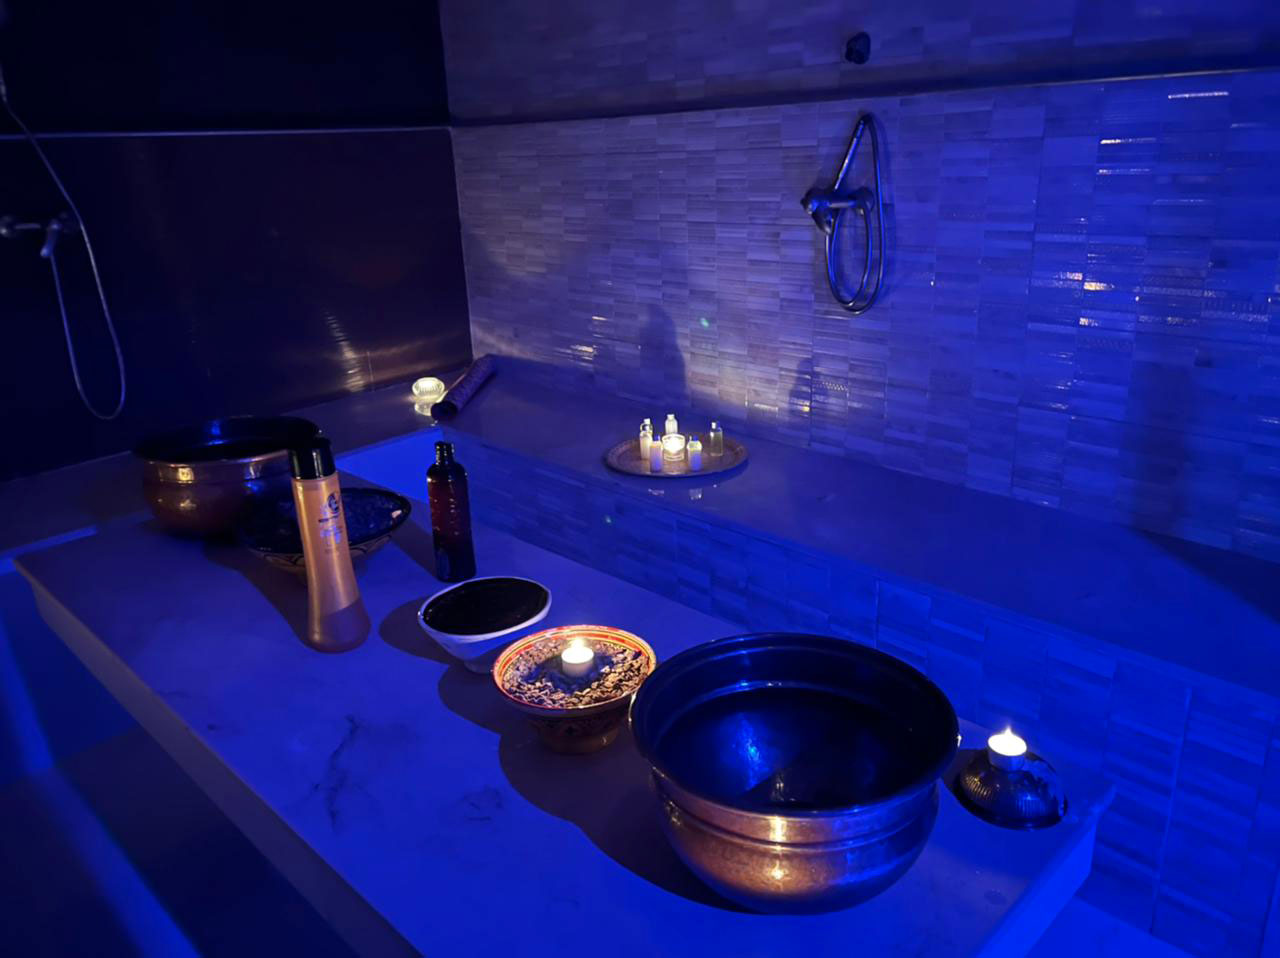 Hammam + traditional exfoliation with black soap + ghassoul mask flavored with 7 plants + relaxing massage